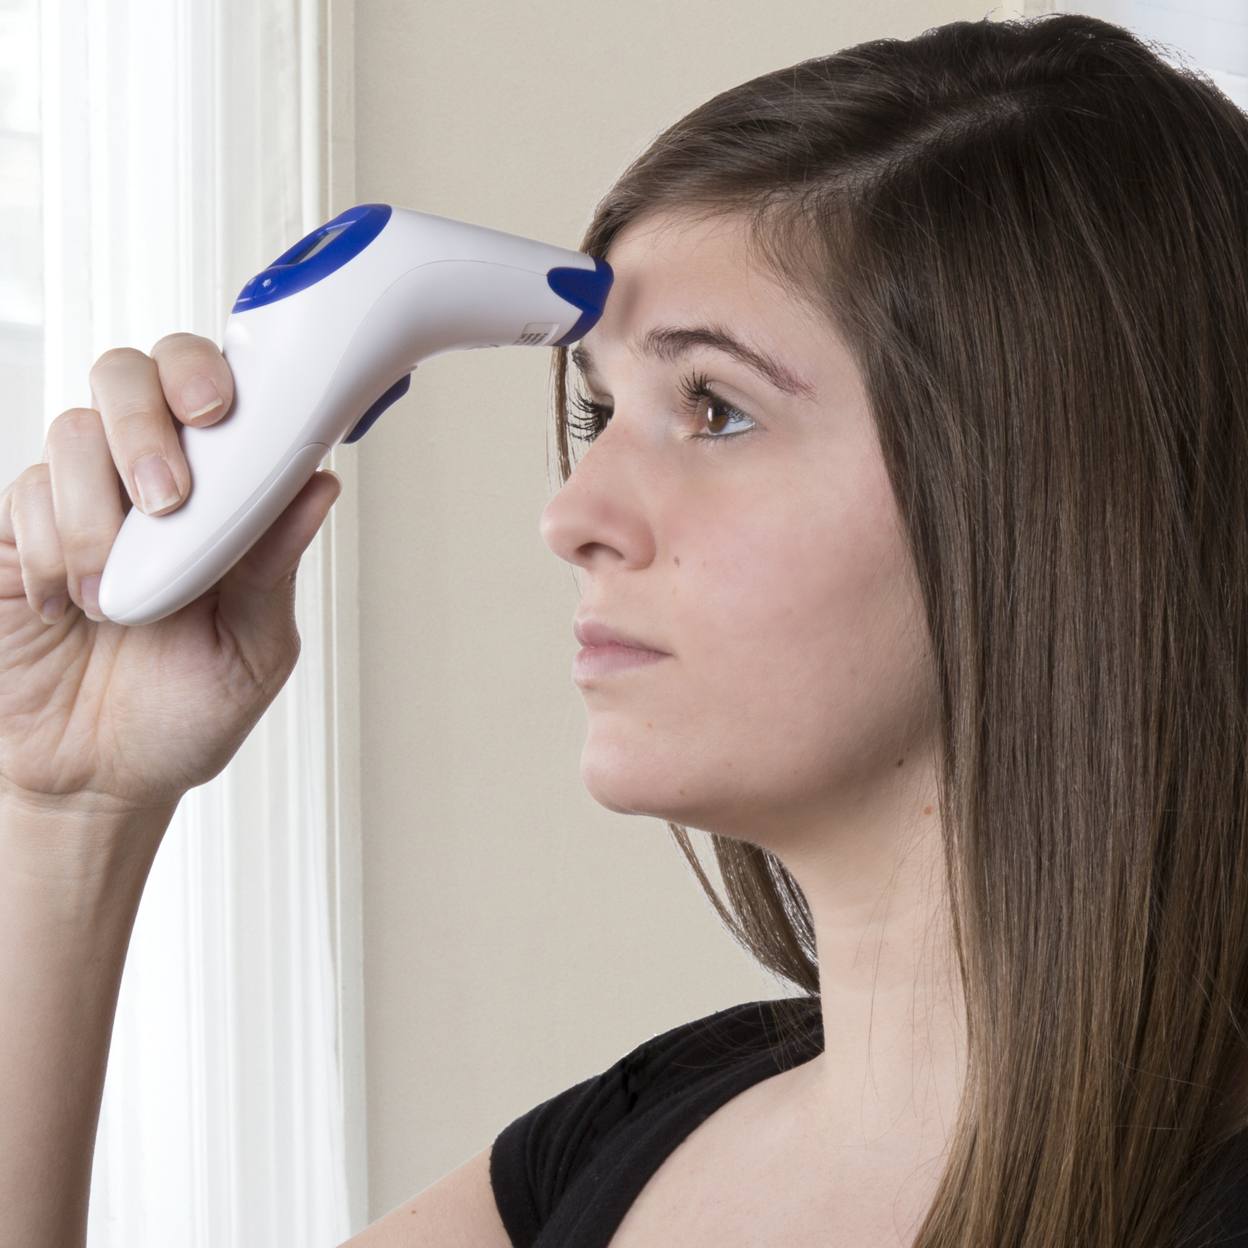 Infrared Thermometer- Non Contact Temperature Reader With Easy To Read Digital Display